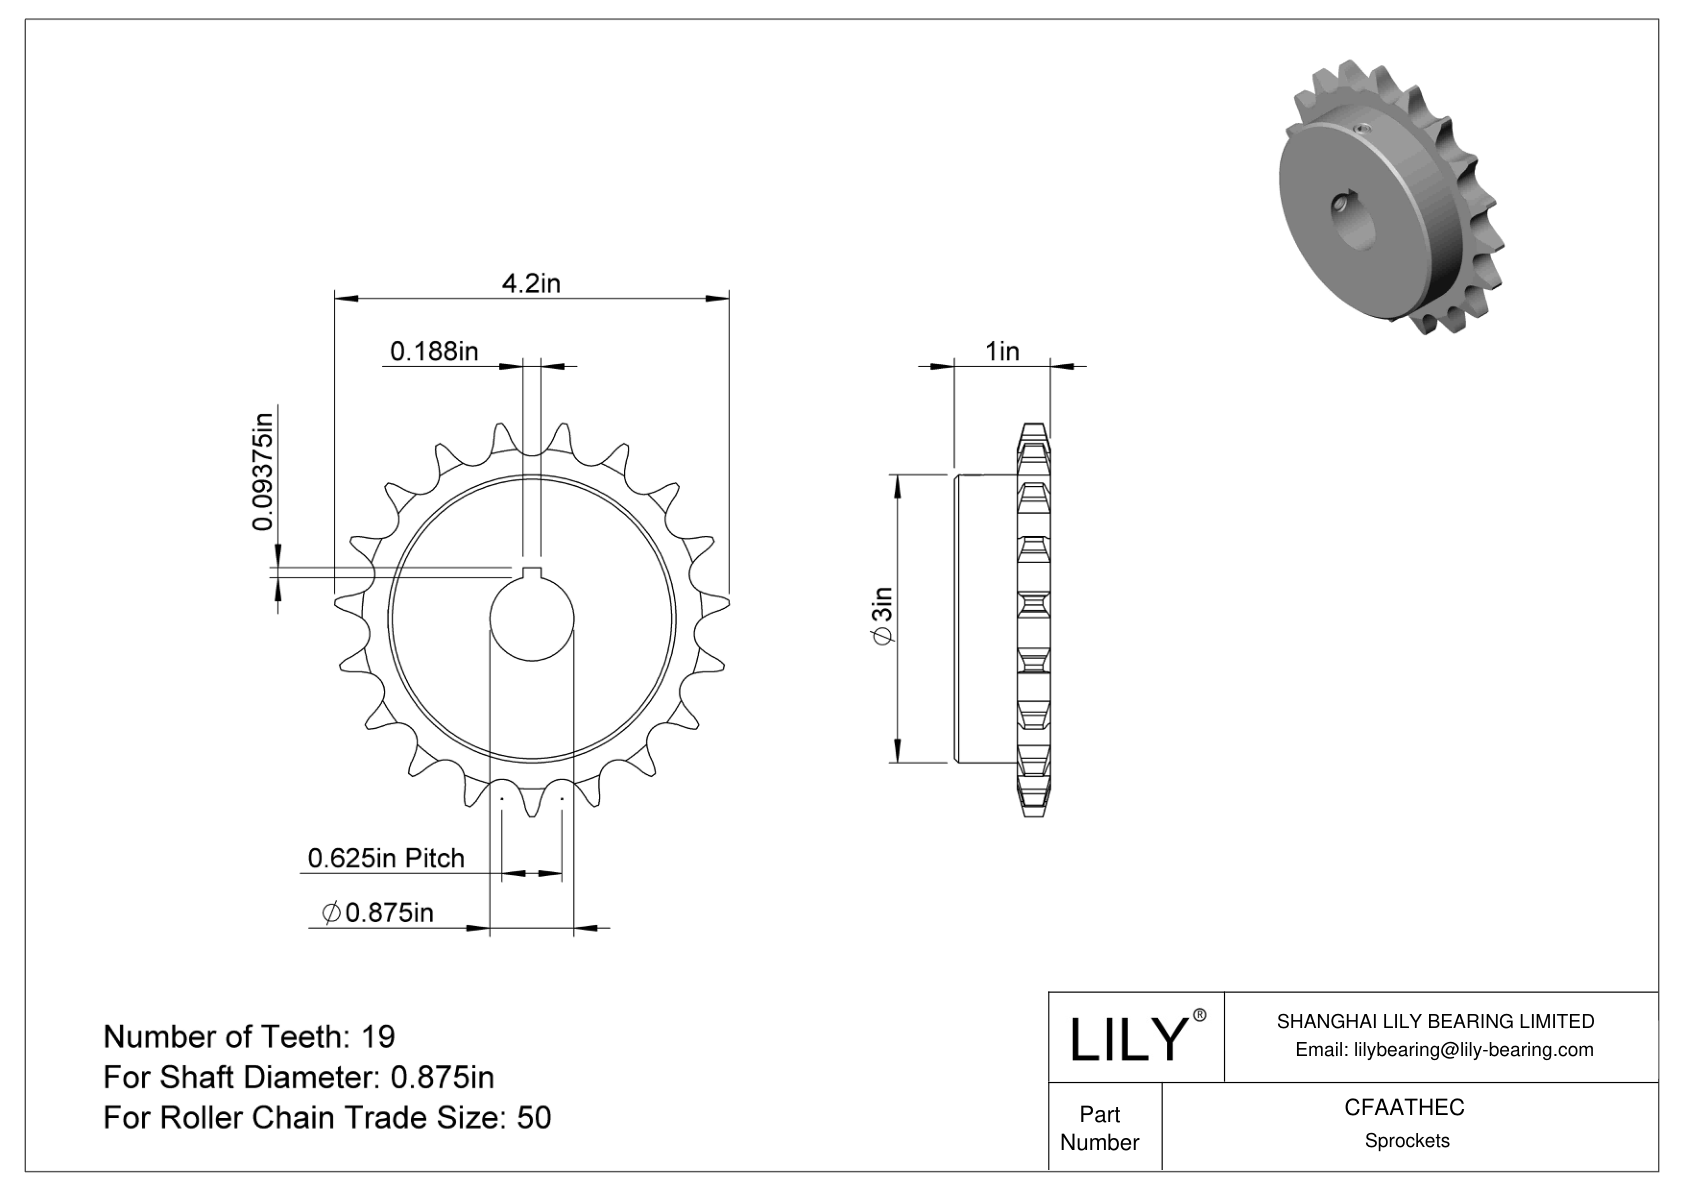 CFAATHEC Wear-Resistant Sprockets for ANSI Roller Chain cad drawing